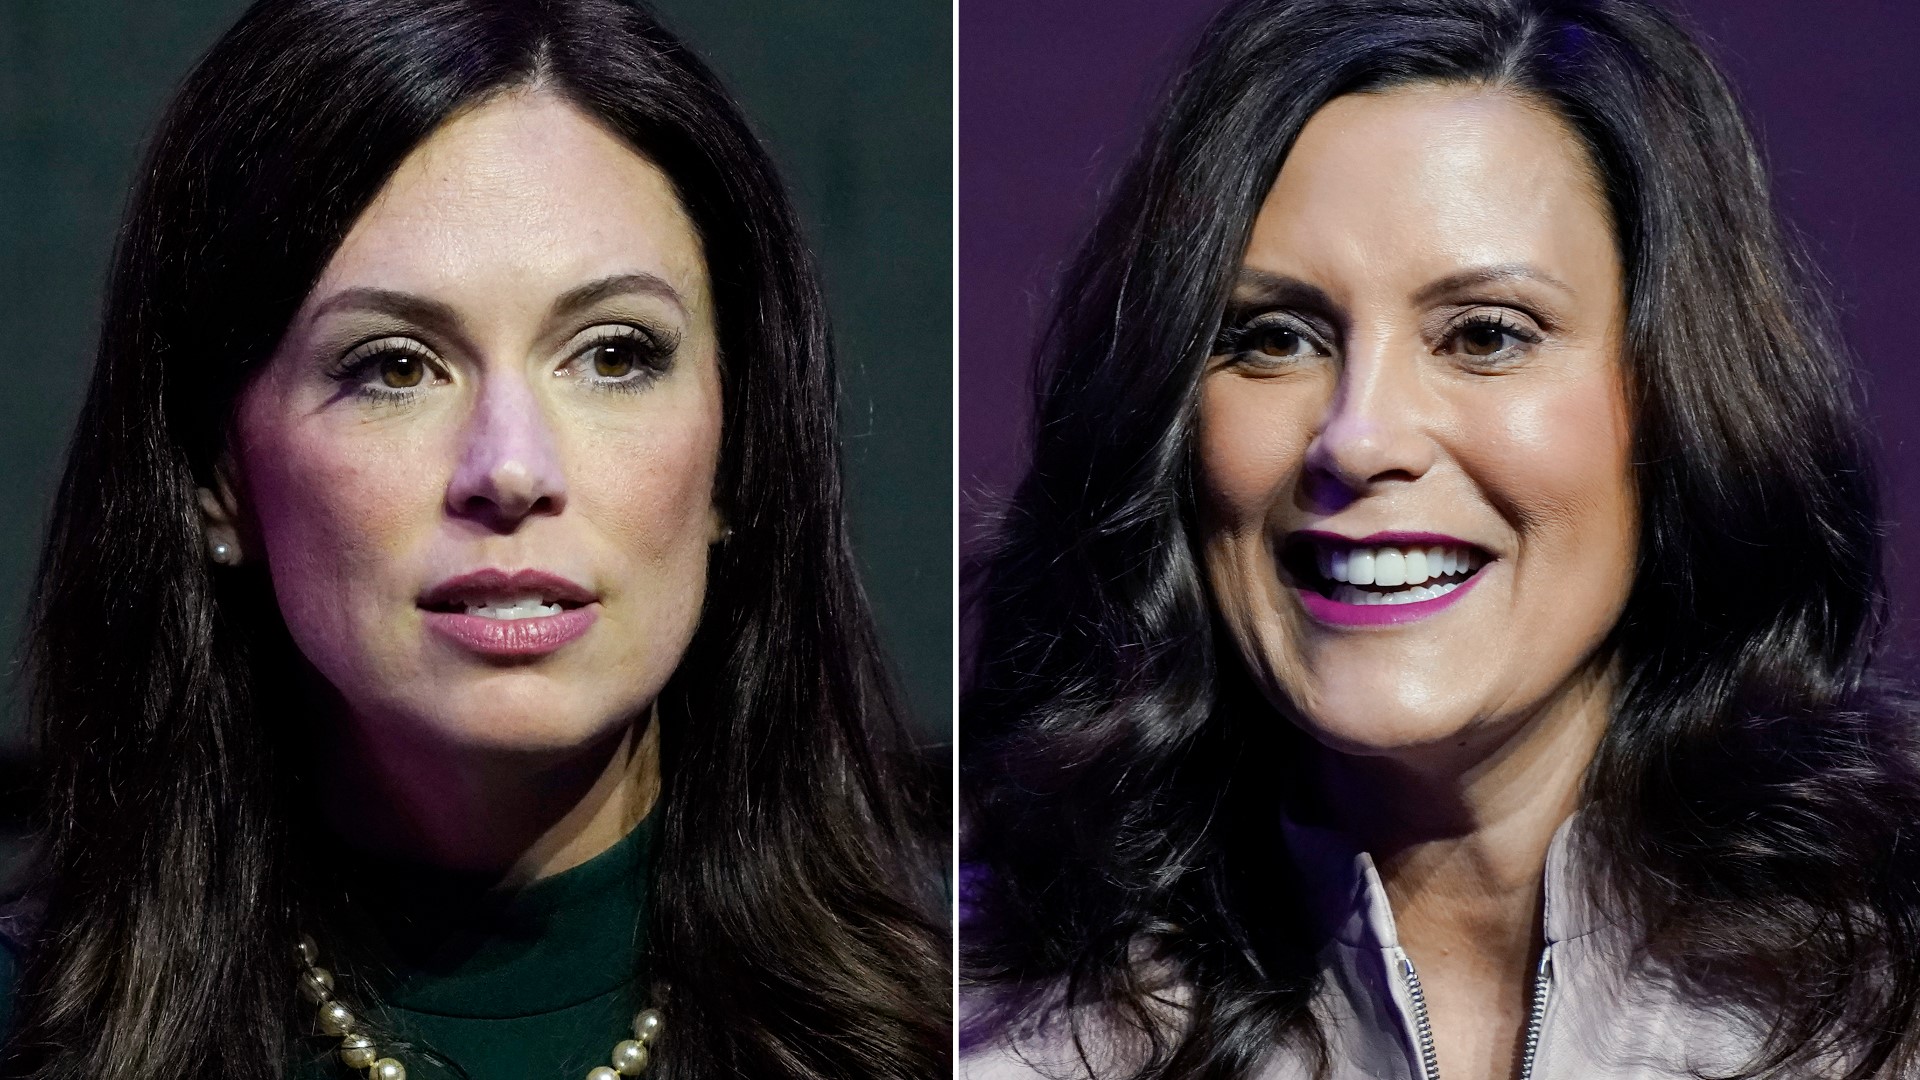 Weekend poll data tracking Michigan’s top races are giving new numbers that suggest while Gov. Gretchen Whitmer might be carrying a small lead, it is decreasing.